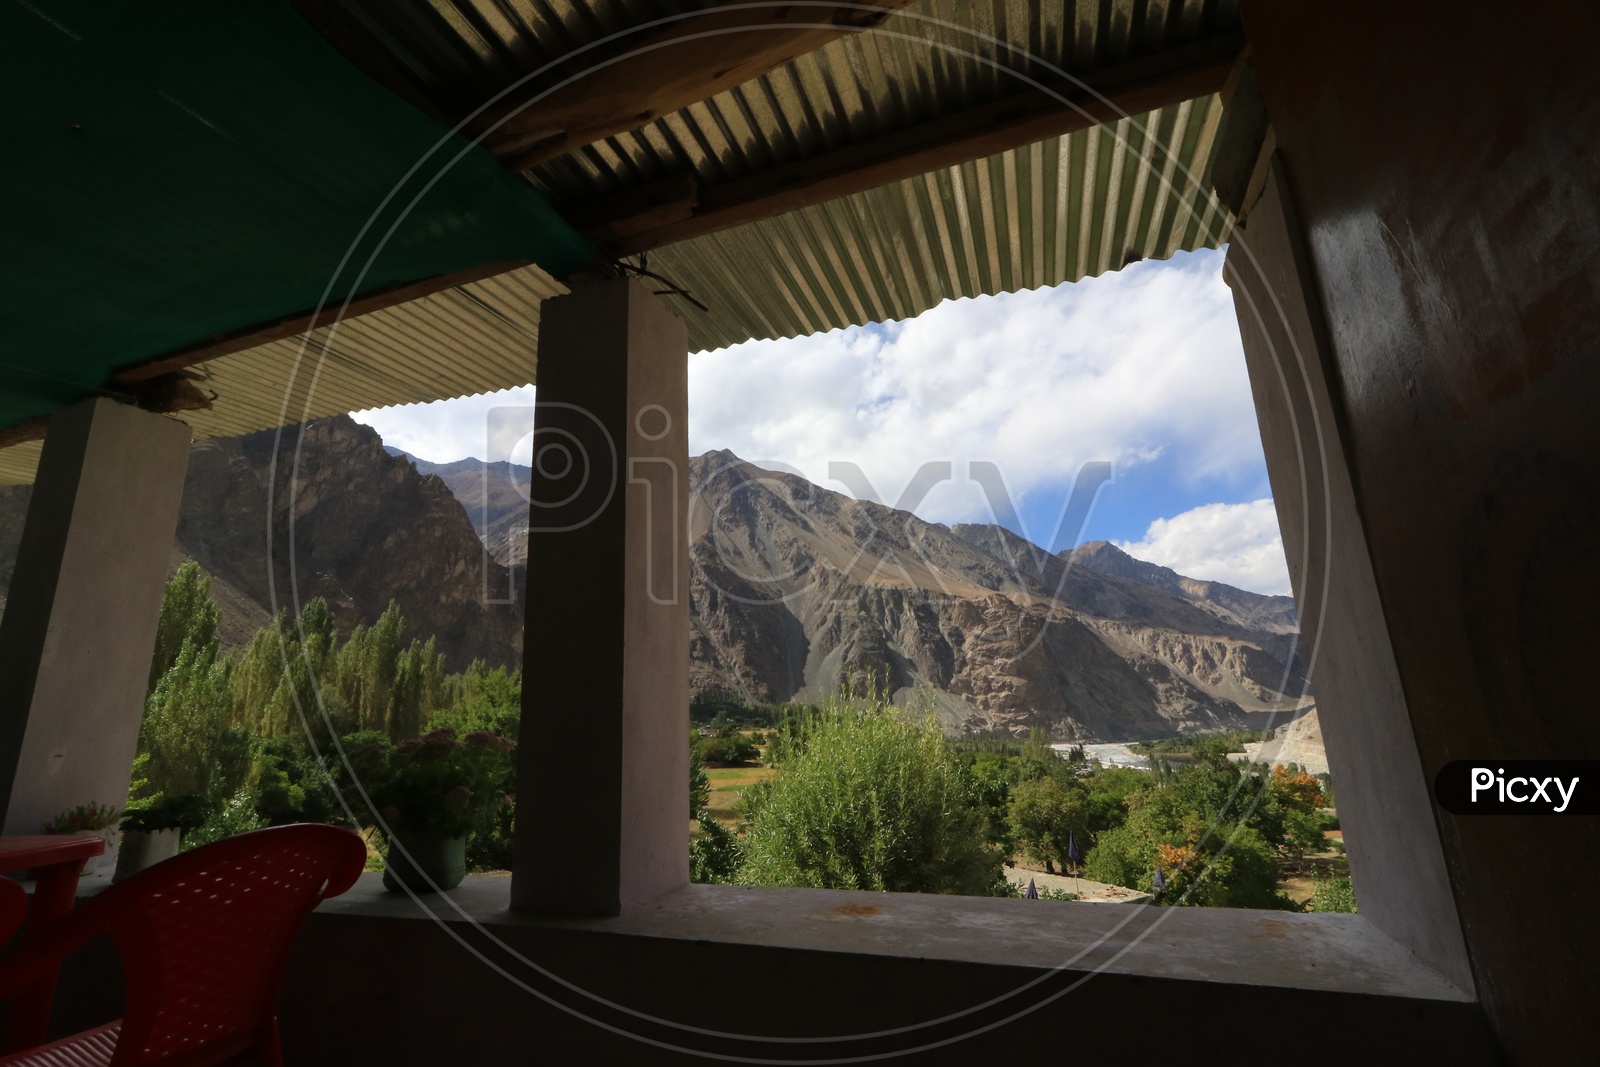 Landscape of beautiful Mountains of Leh captured from window